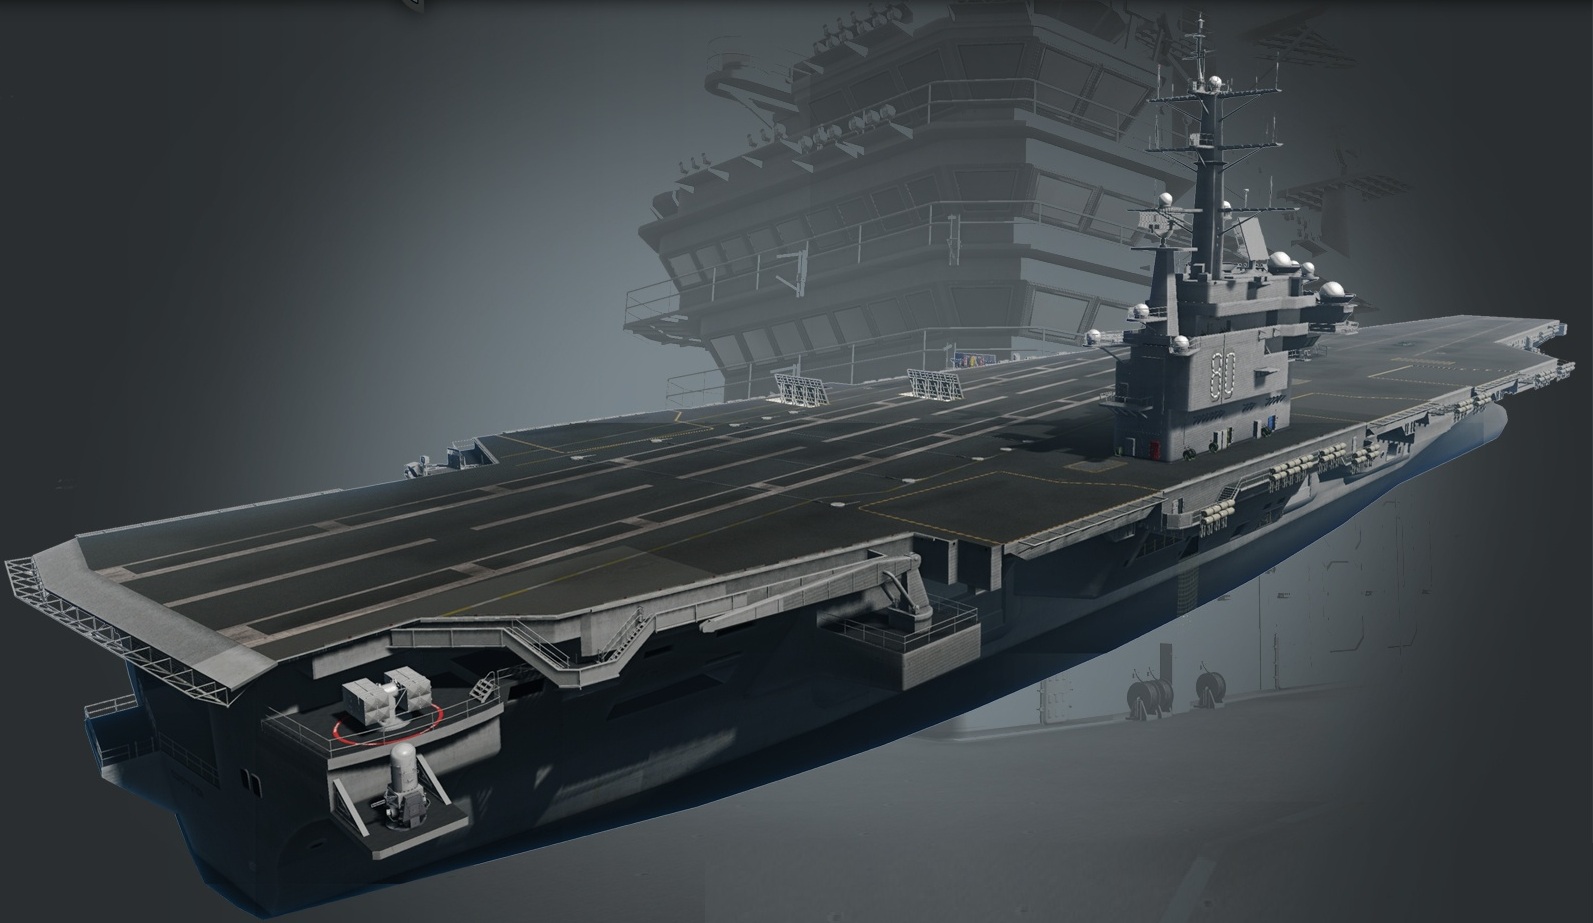 Uss gerald r ford wiki #3